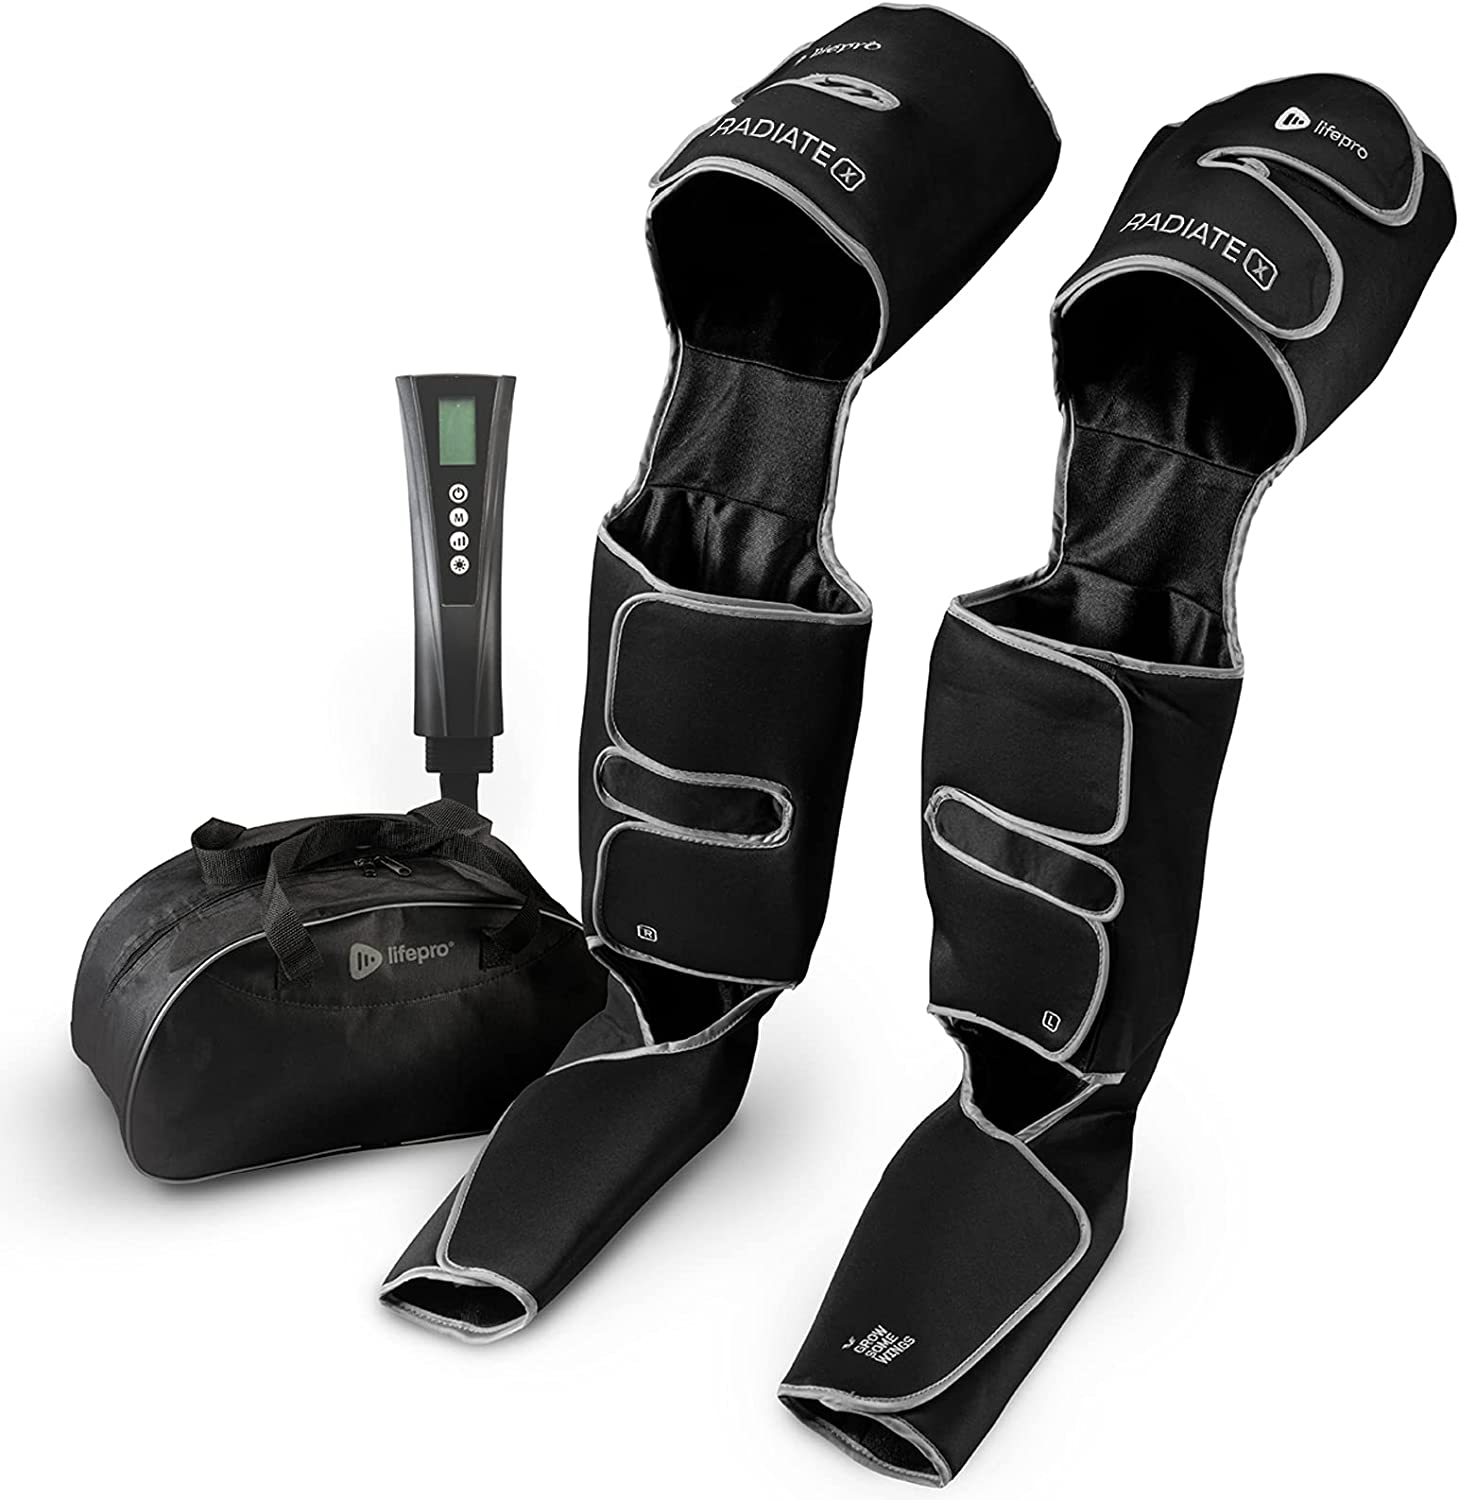 Lifepro Radiate X Thigh Calf And Foot Massager With Compression Leg Massager For Circulation